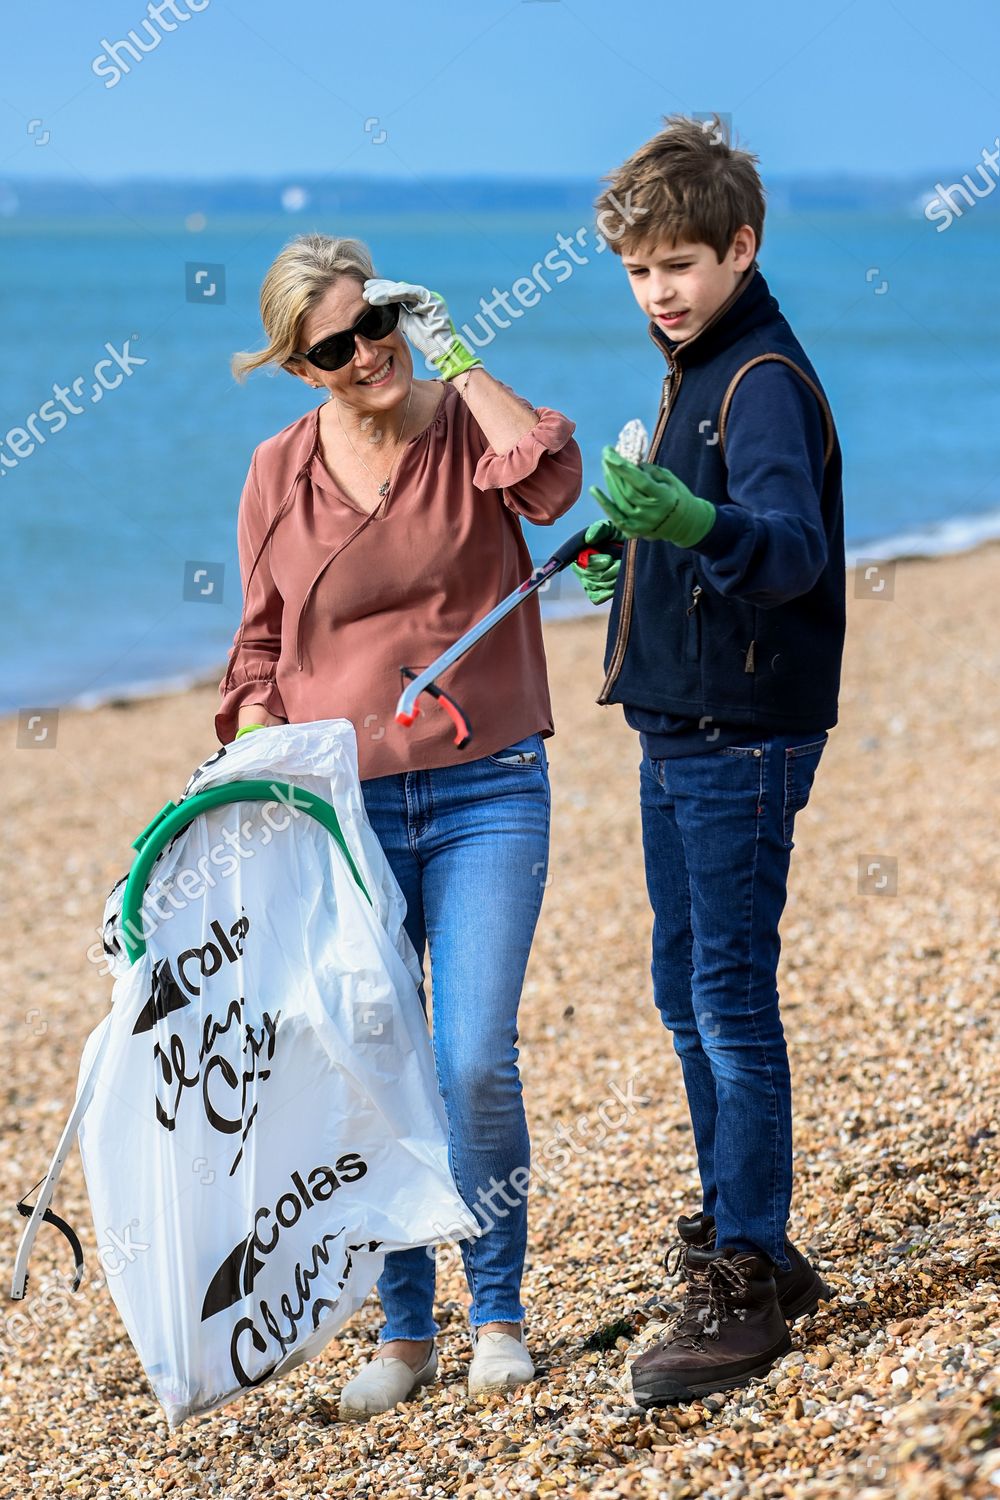 prince-edward-and-sophie-countess-of-wessex-great-british-beach-clean-southsea-beach-portsmouth-uk-shutterstock-editorial-10782998ba.jpg